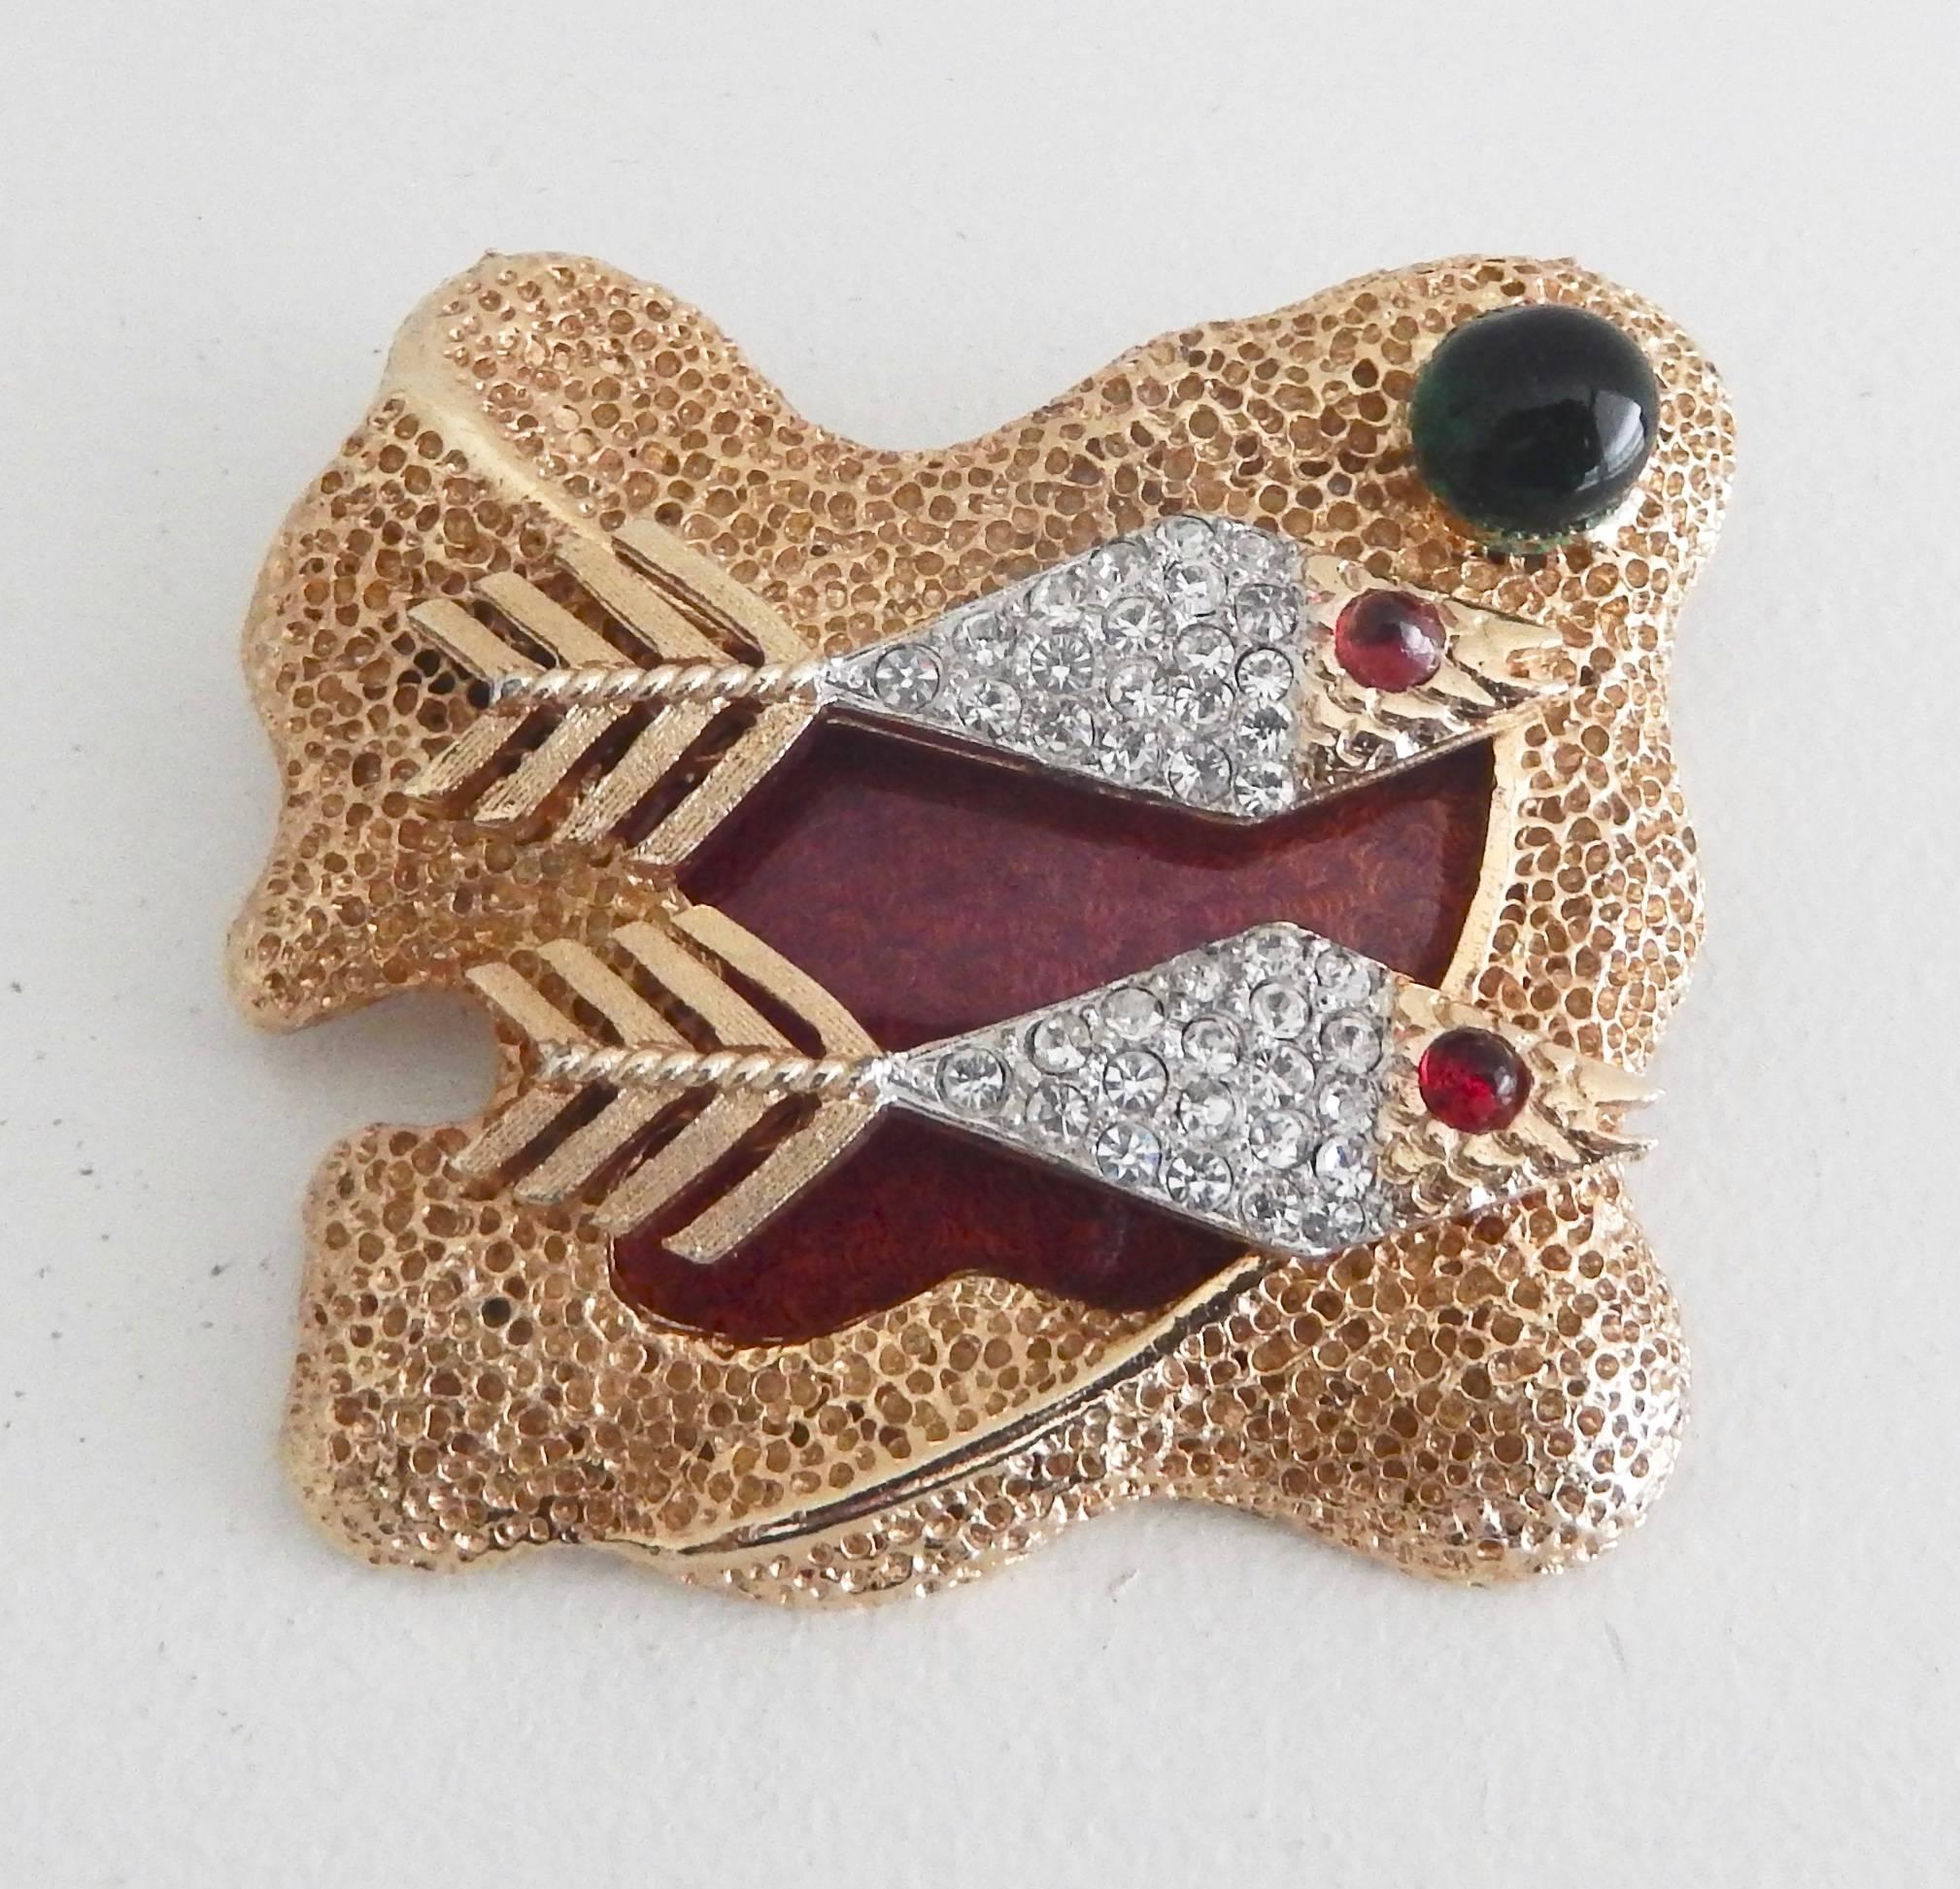 A rare, sculptural pin by Vendome of two rhinestone pave fish.  Designed by Helen Marion, head designer of Coro's high end line, Vendome, it is one of six designs inspired by the work of Georges Braque.  Marion was known for using high quality